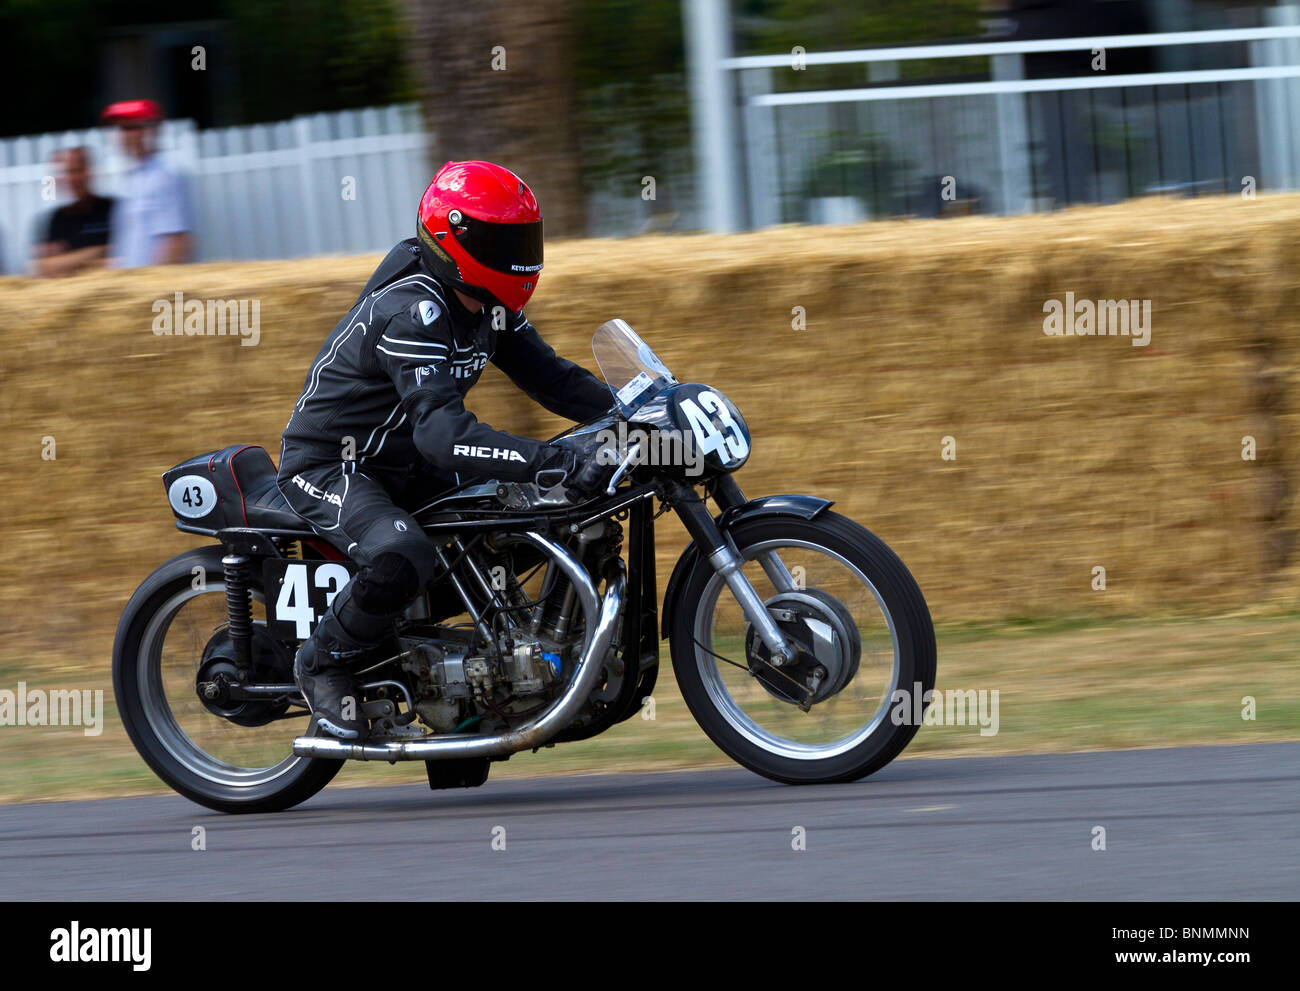 1952 Norton Jap V-Twin 'Saltdean Special' with rider Steve Keys at the 2010 Goodwood Festival of Speed, Sussex, England, UK. Stock Photo